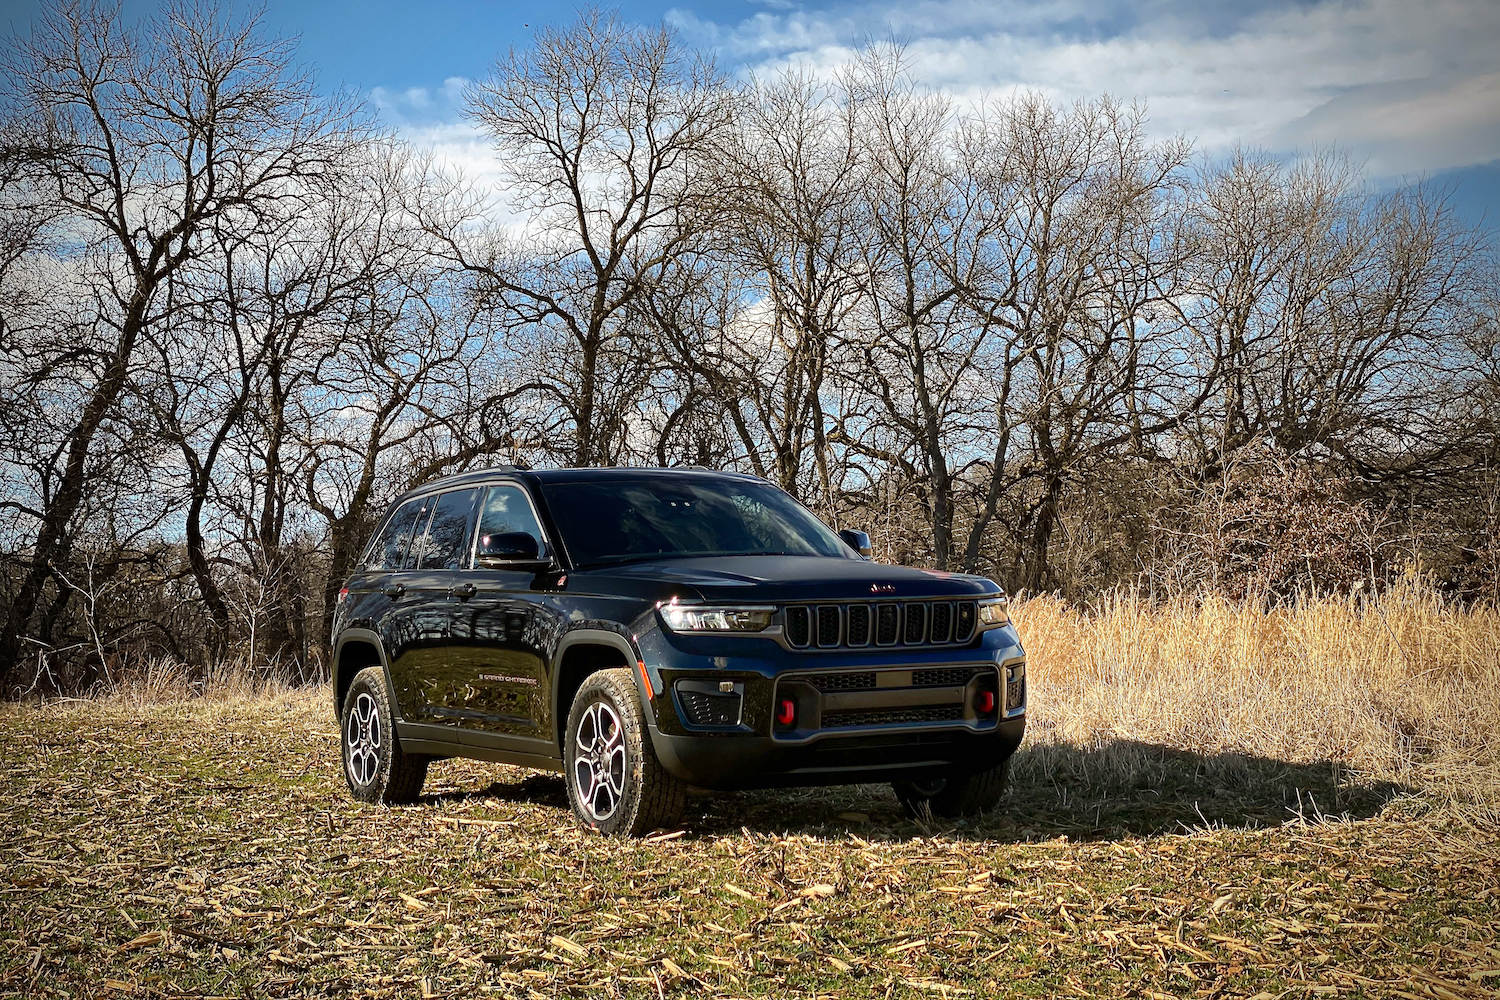 Front view of 2022 Jeep Grand Cherokee Trailhawk from passenger's side in a grassy field with trees in the background.